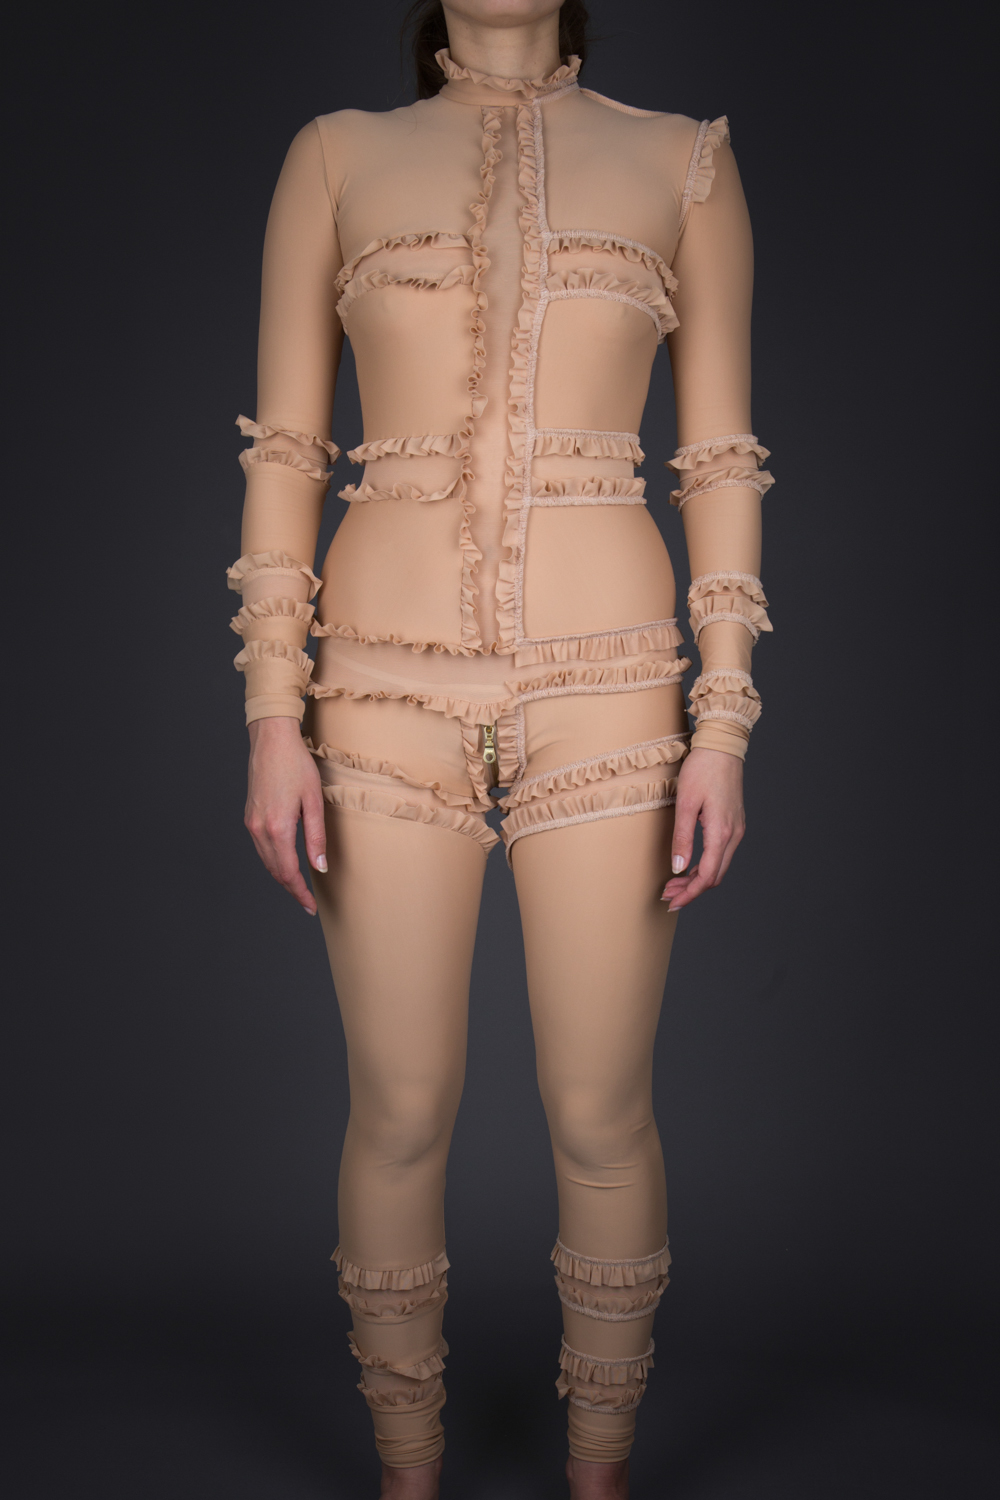 'Immodesty' Ruffled Jumpsuit by Rachel Freire, 2010, UK. The Underpinnings Museum. Photography by Tigz Rice.